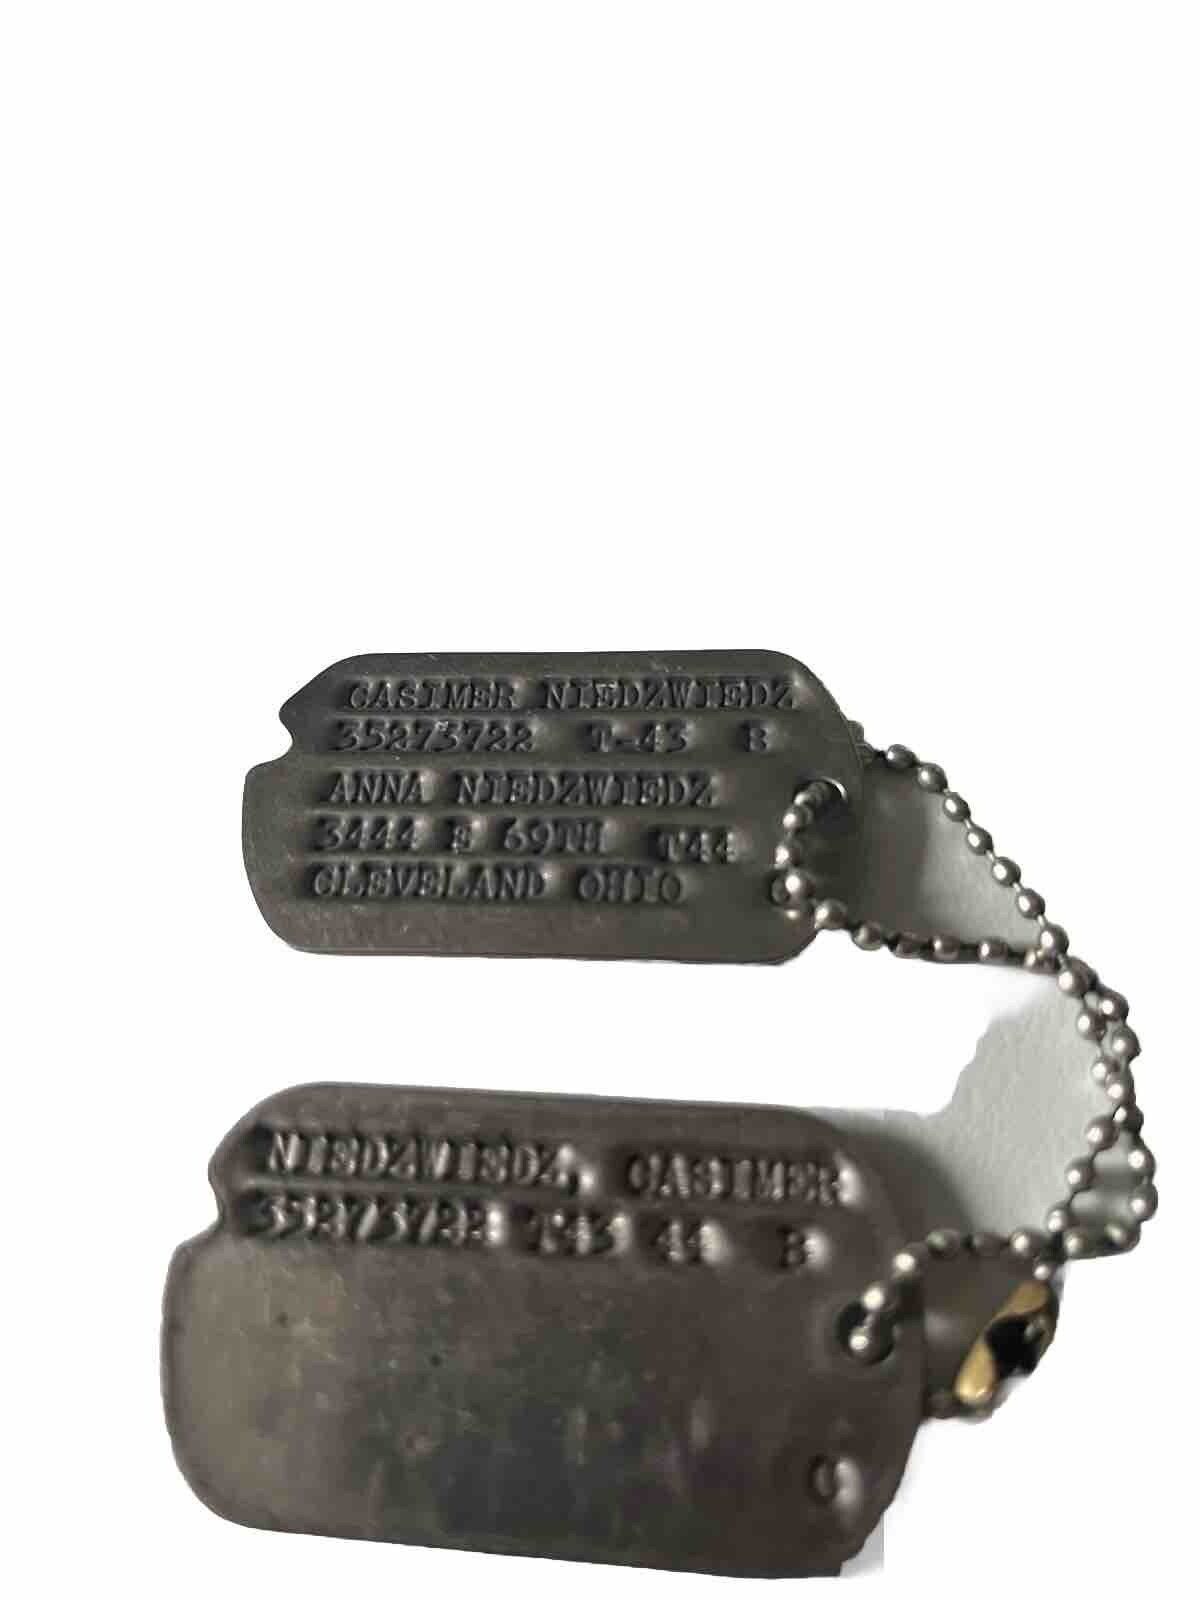 WW2 WWII US Army-Next of Kin T43 Dog Tags-Pair-Cleveland Ohio Drafted -Catholic